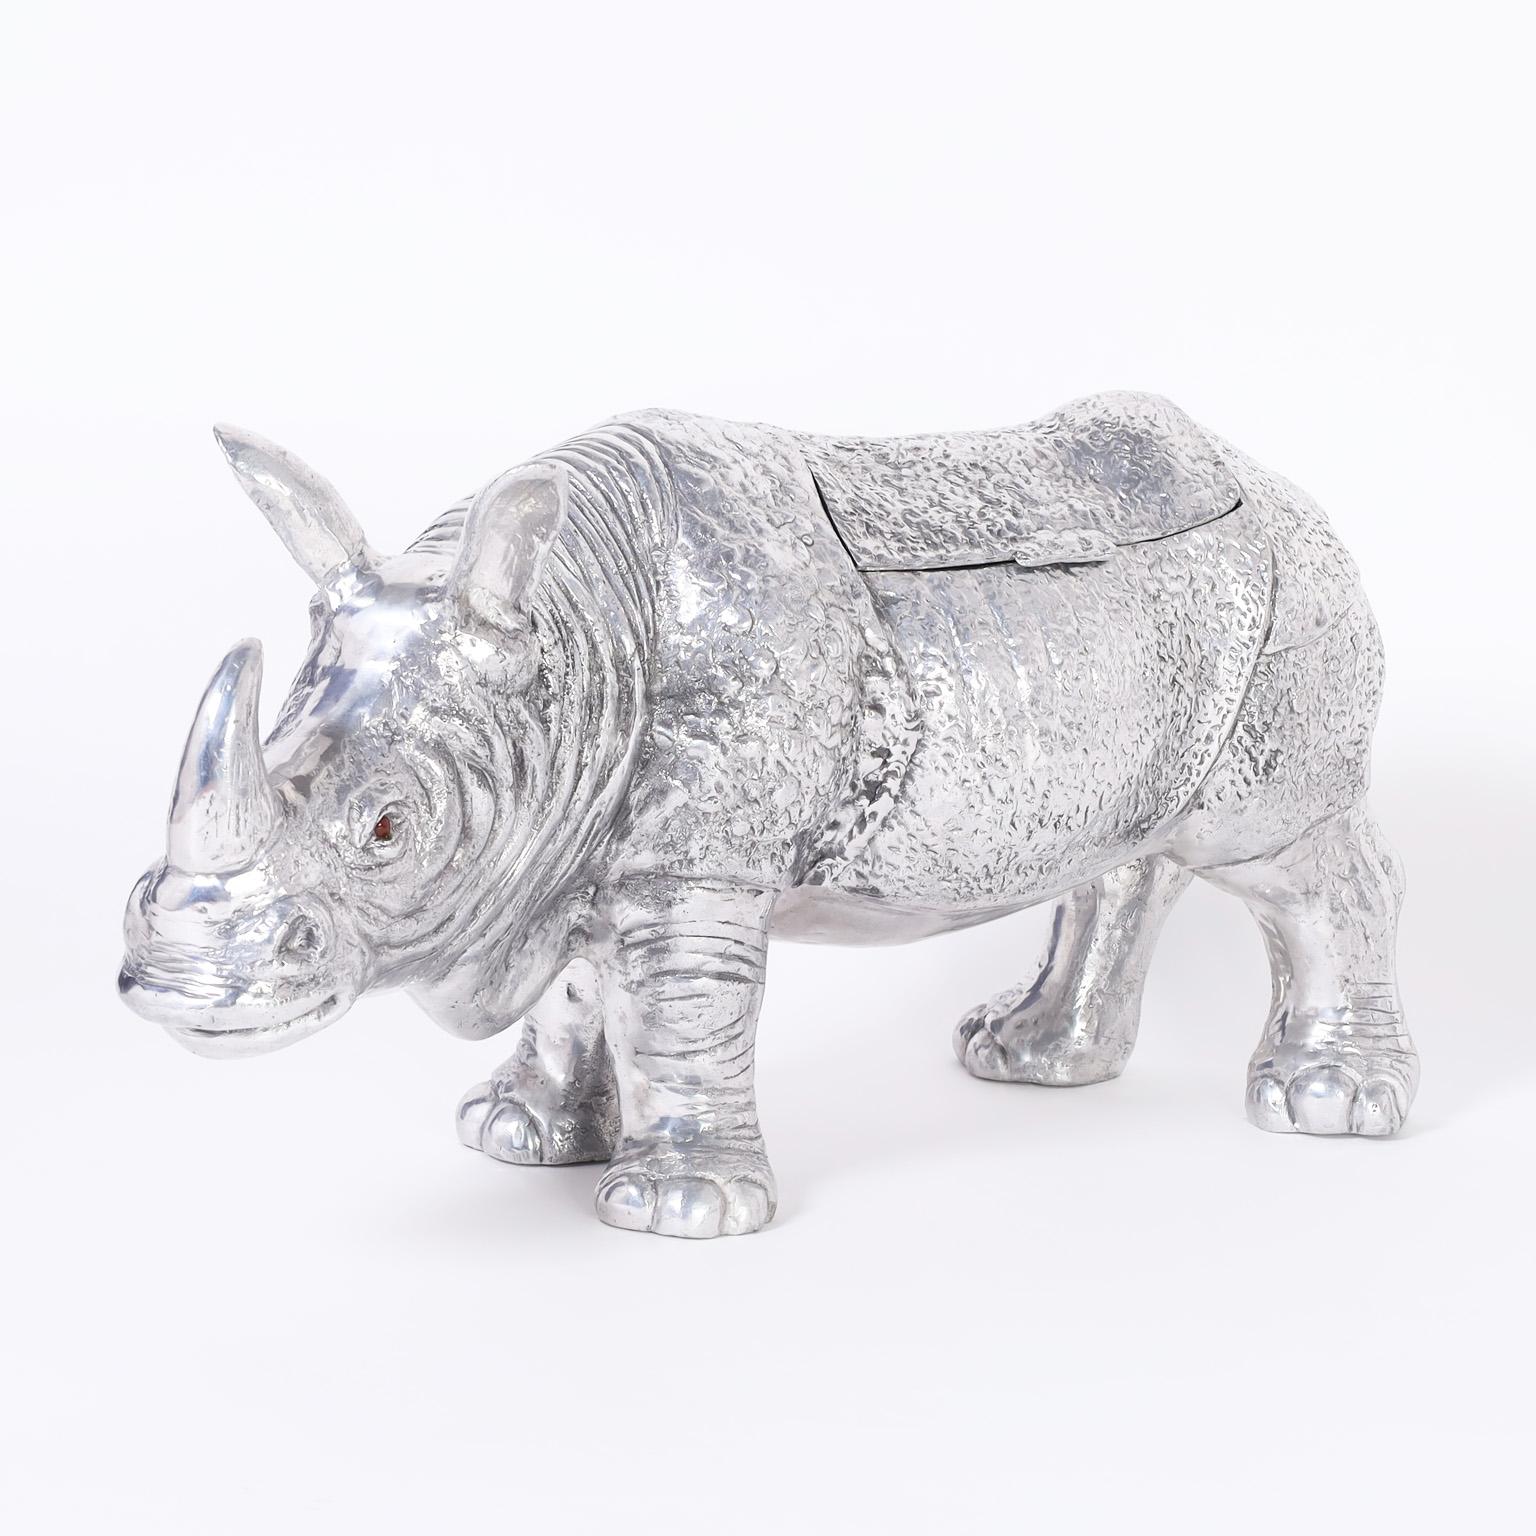 Striking mid-century sculpture of a Rhinoceros cast in aluminum with its iconic profile and lidded storage compartment.